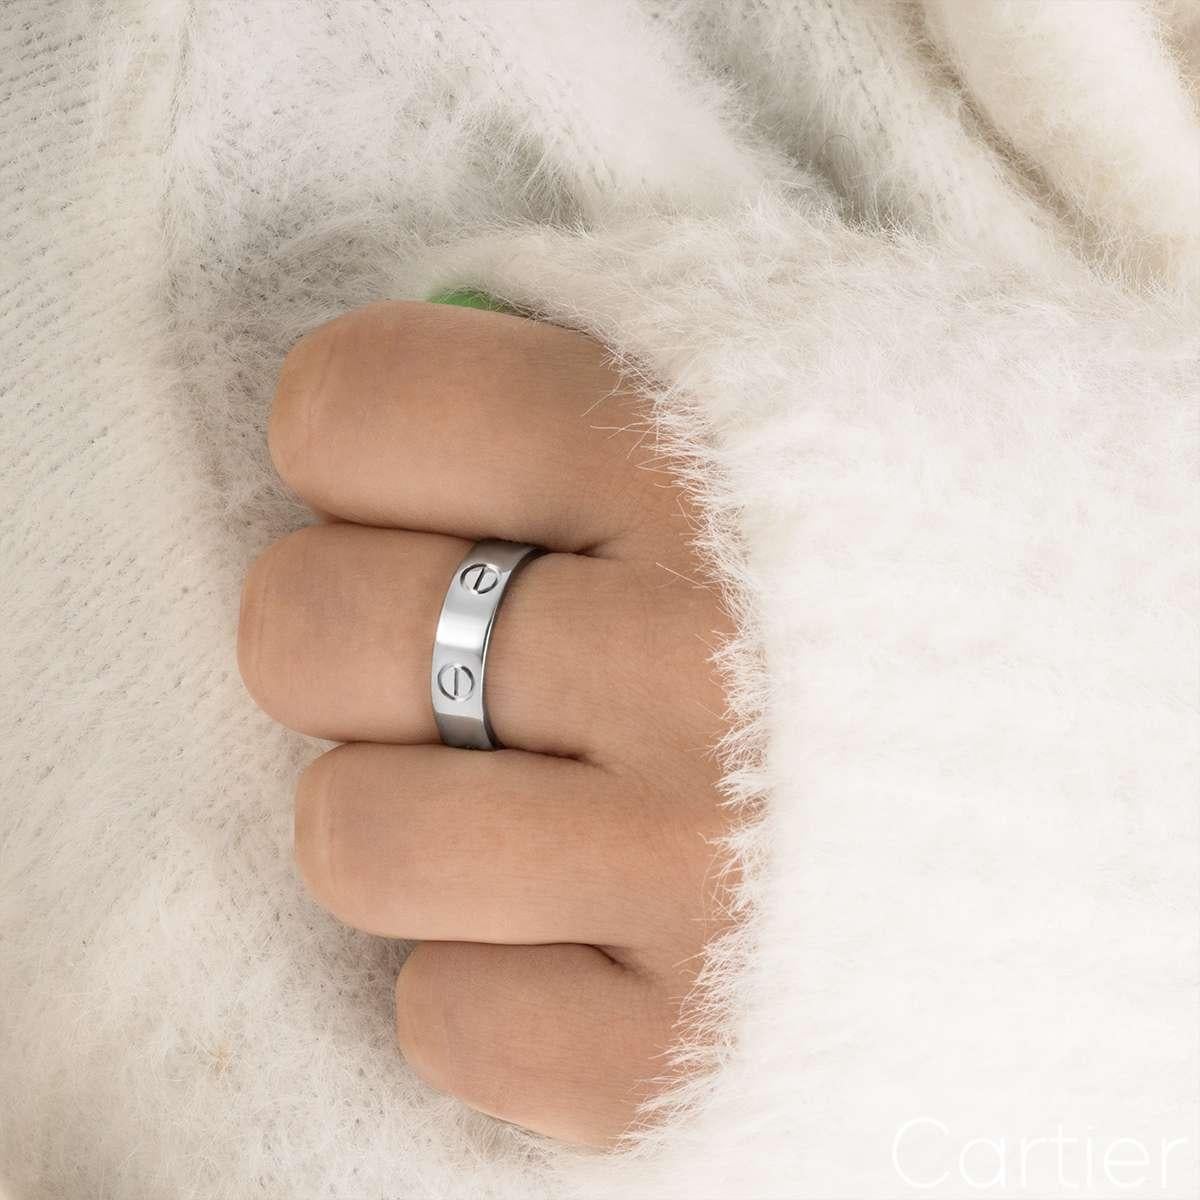 Cartier White Gold Plain Love Ring Size 53 B4084700 For Sale 3